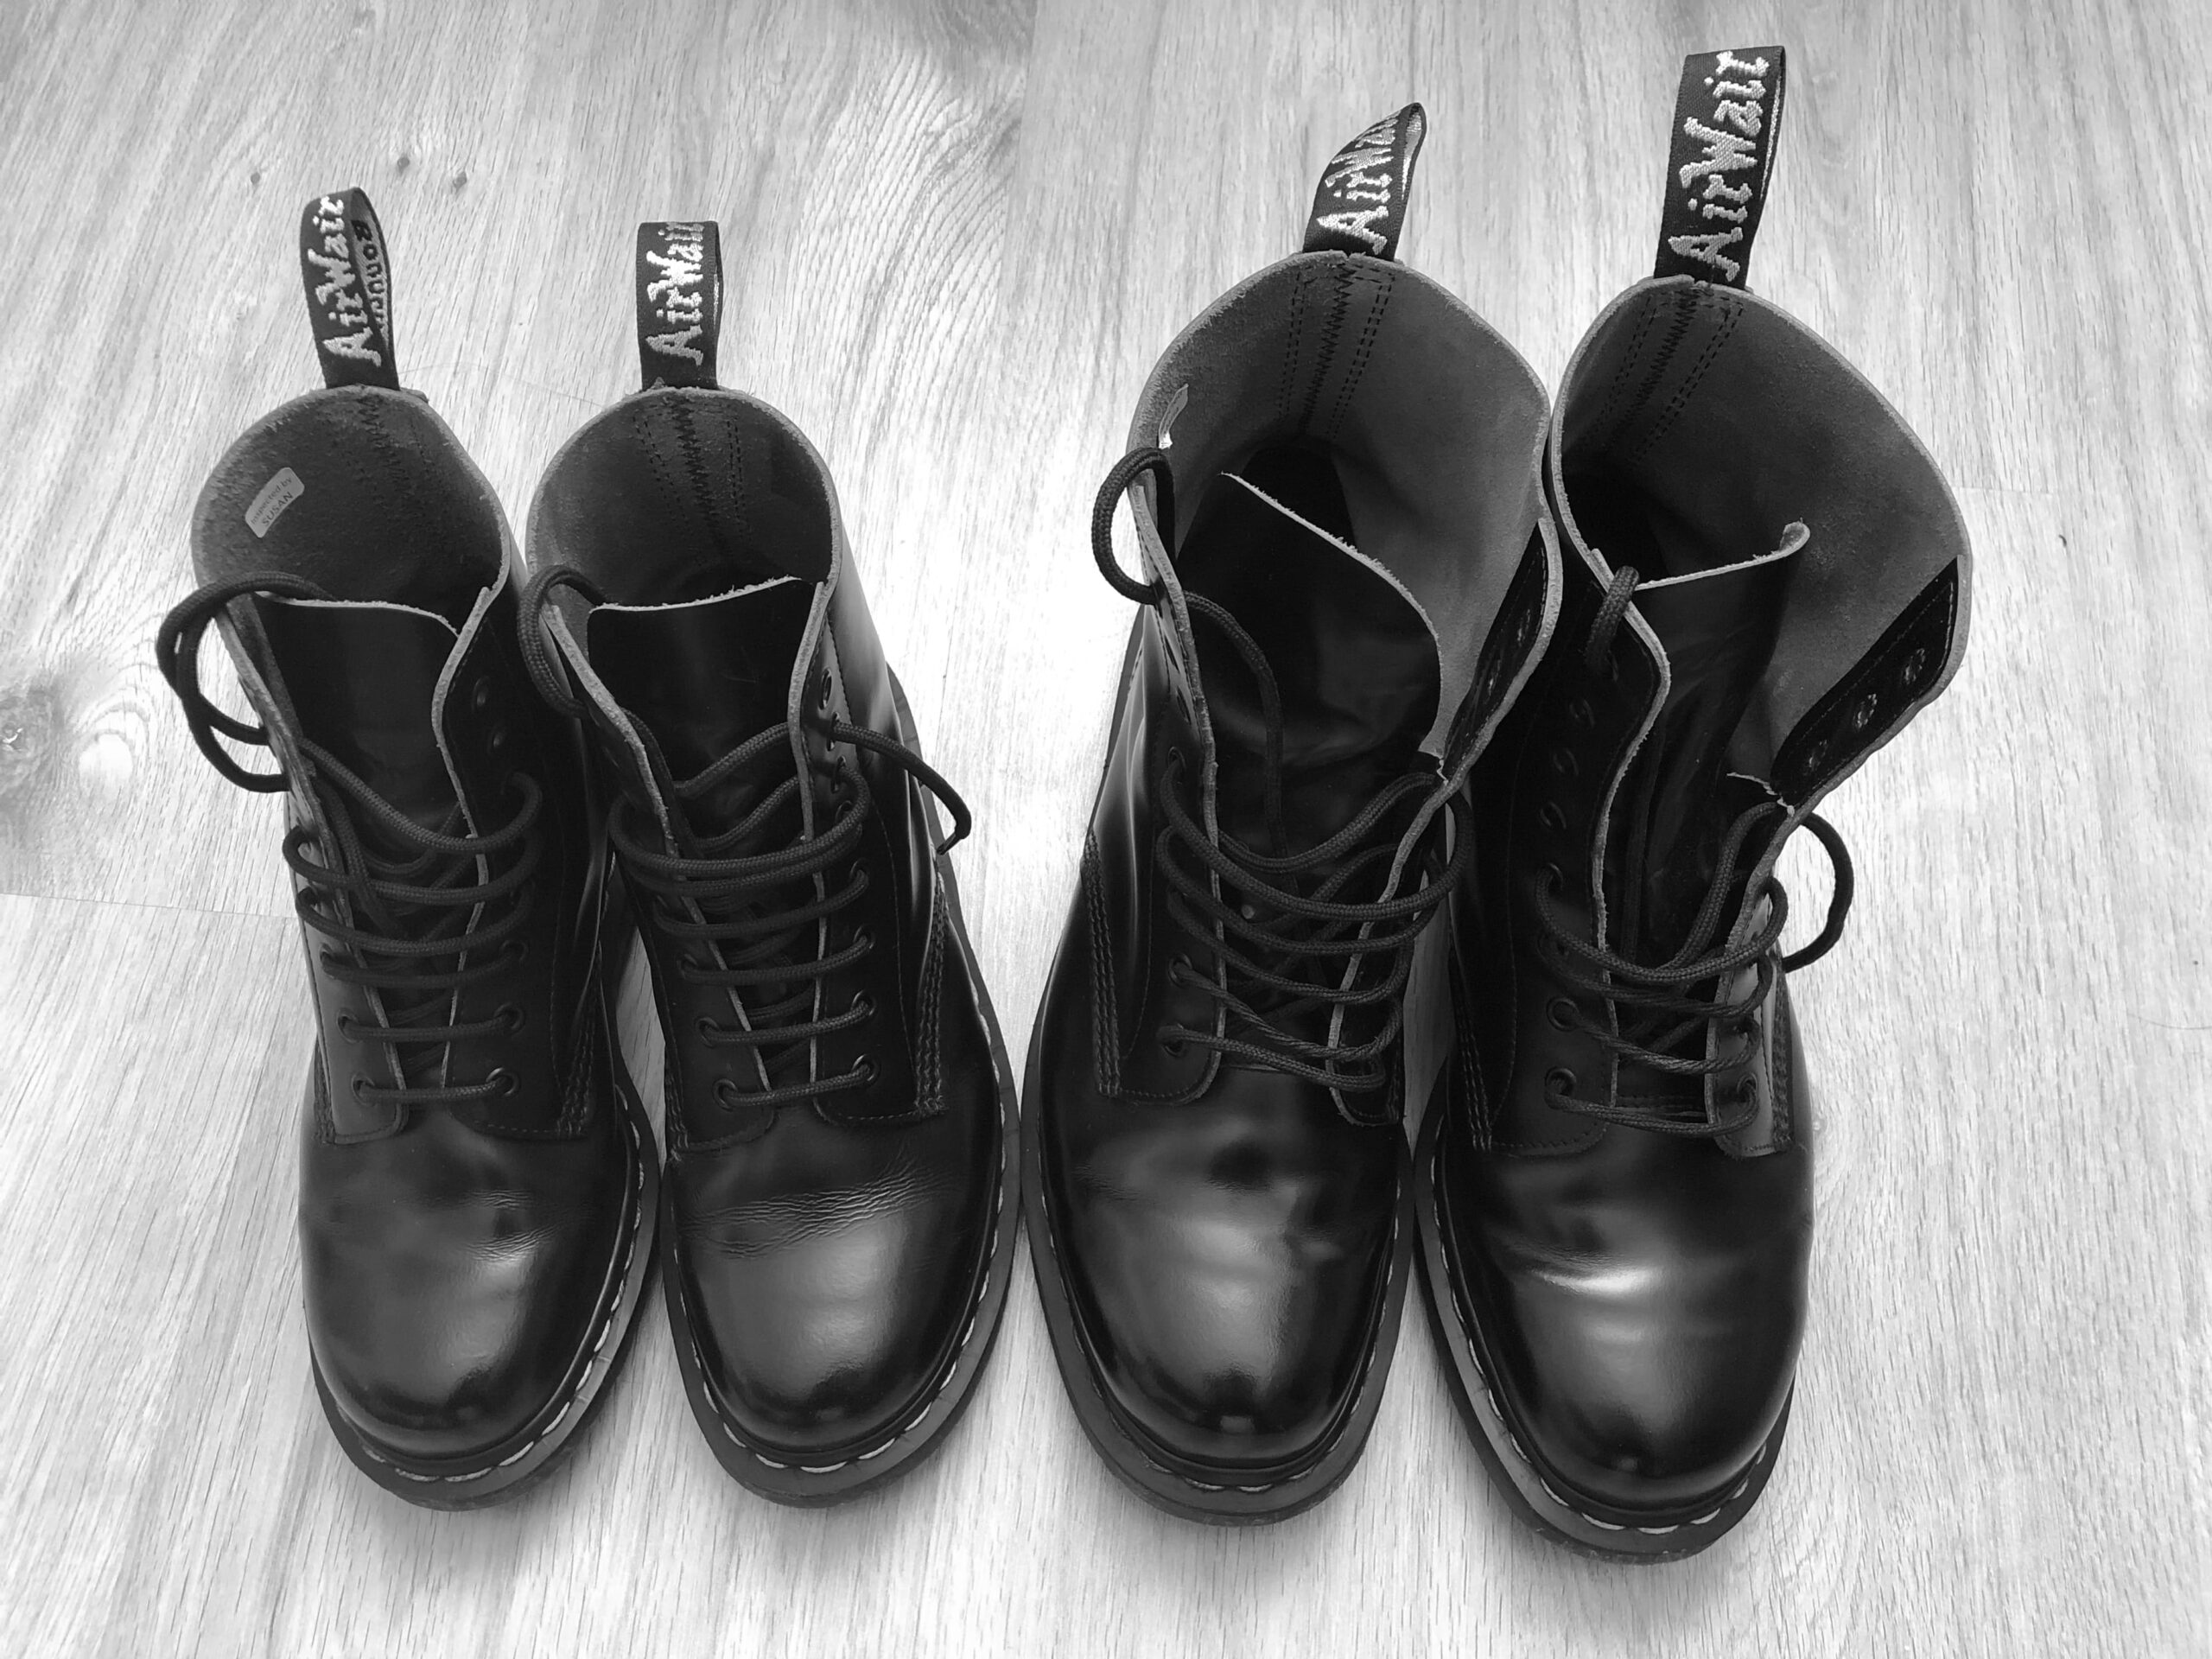 Dr. Martens vs Solovair: Which is the Best Boot?